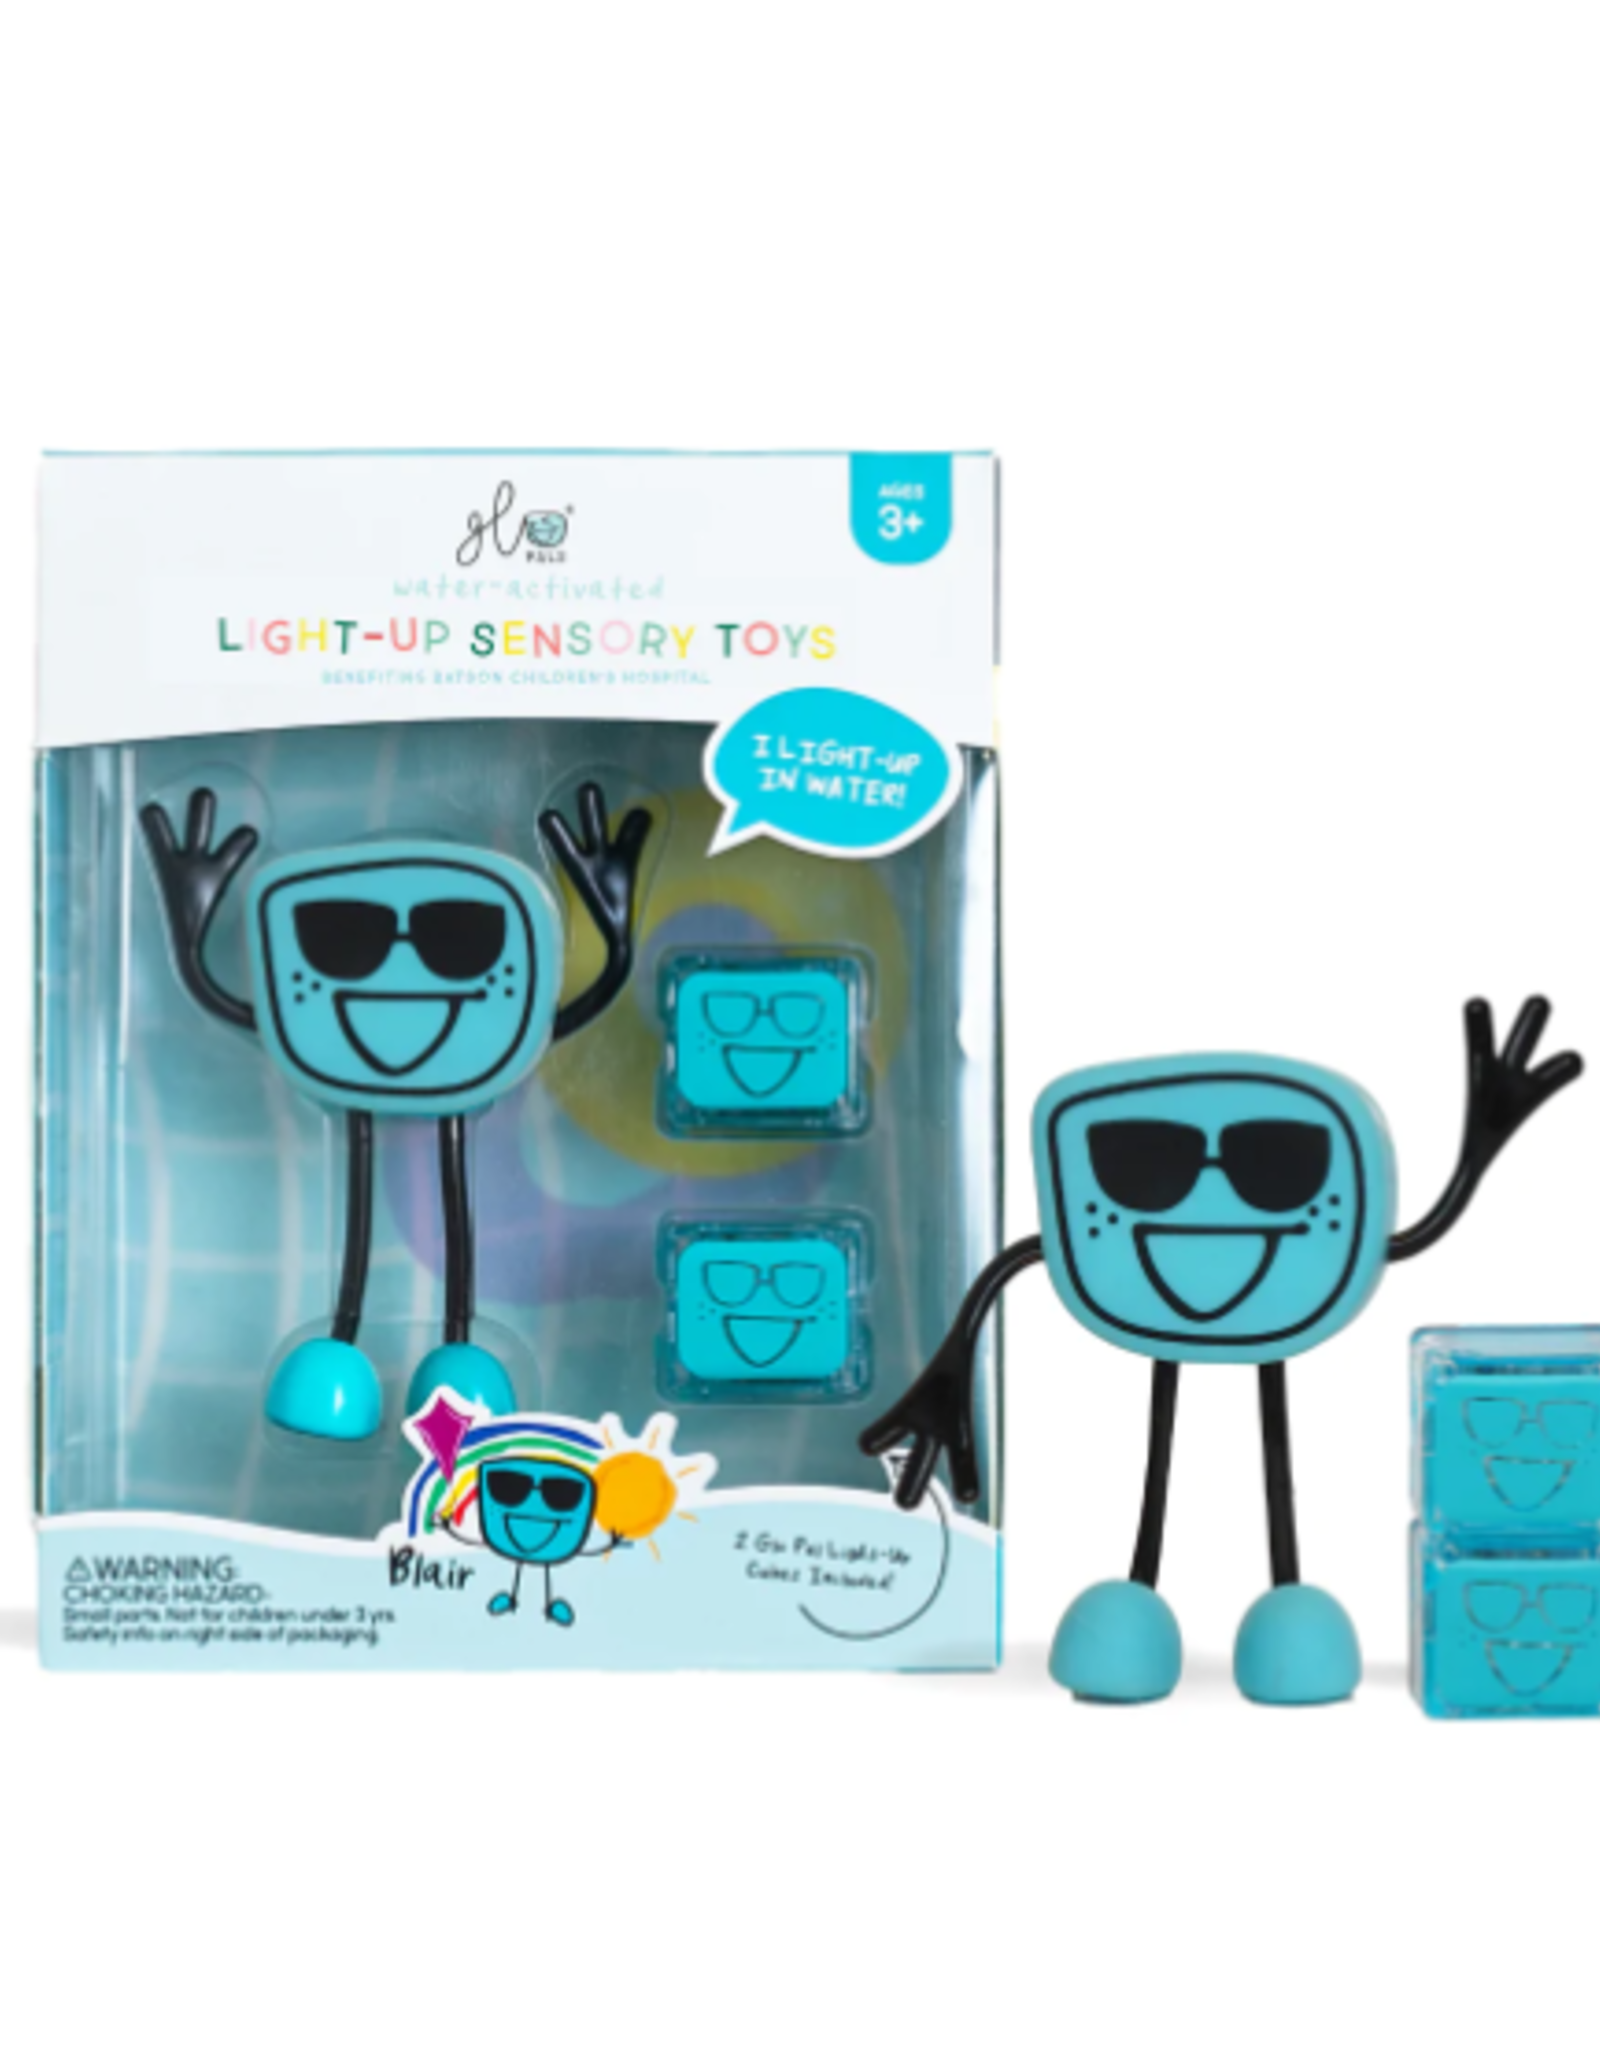 Glo Pals Glo Pals - Light Up Character Blair (Blue)